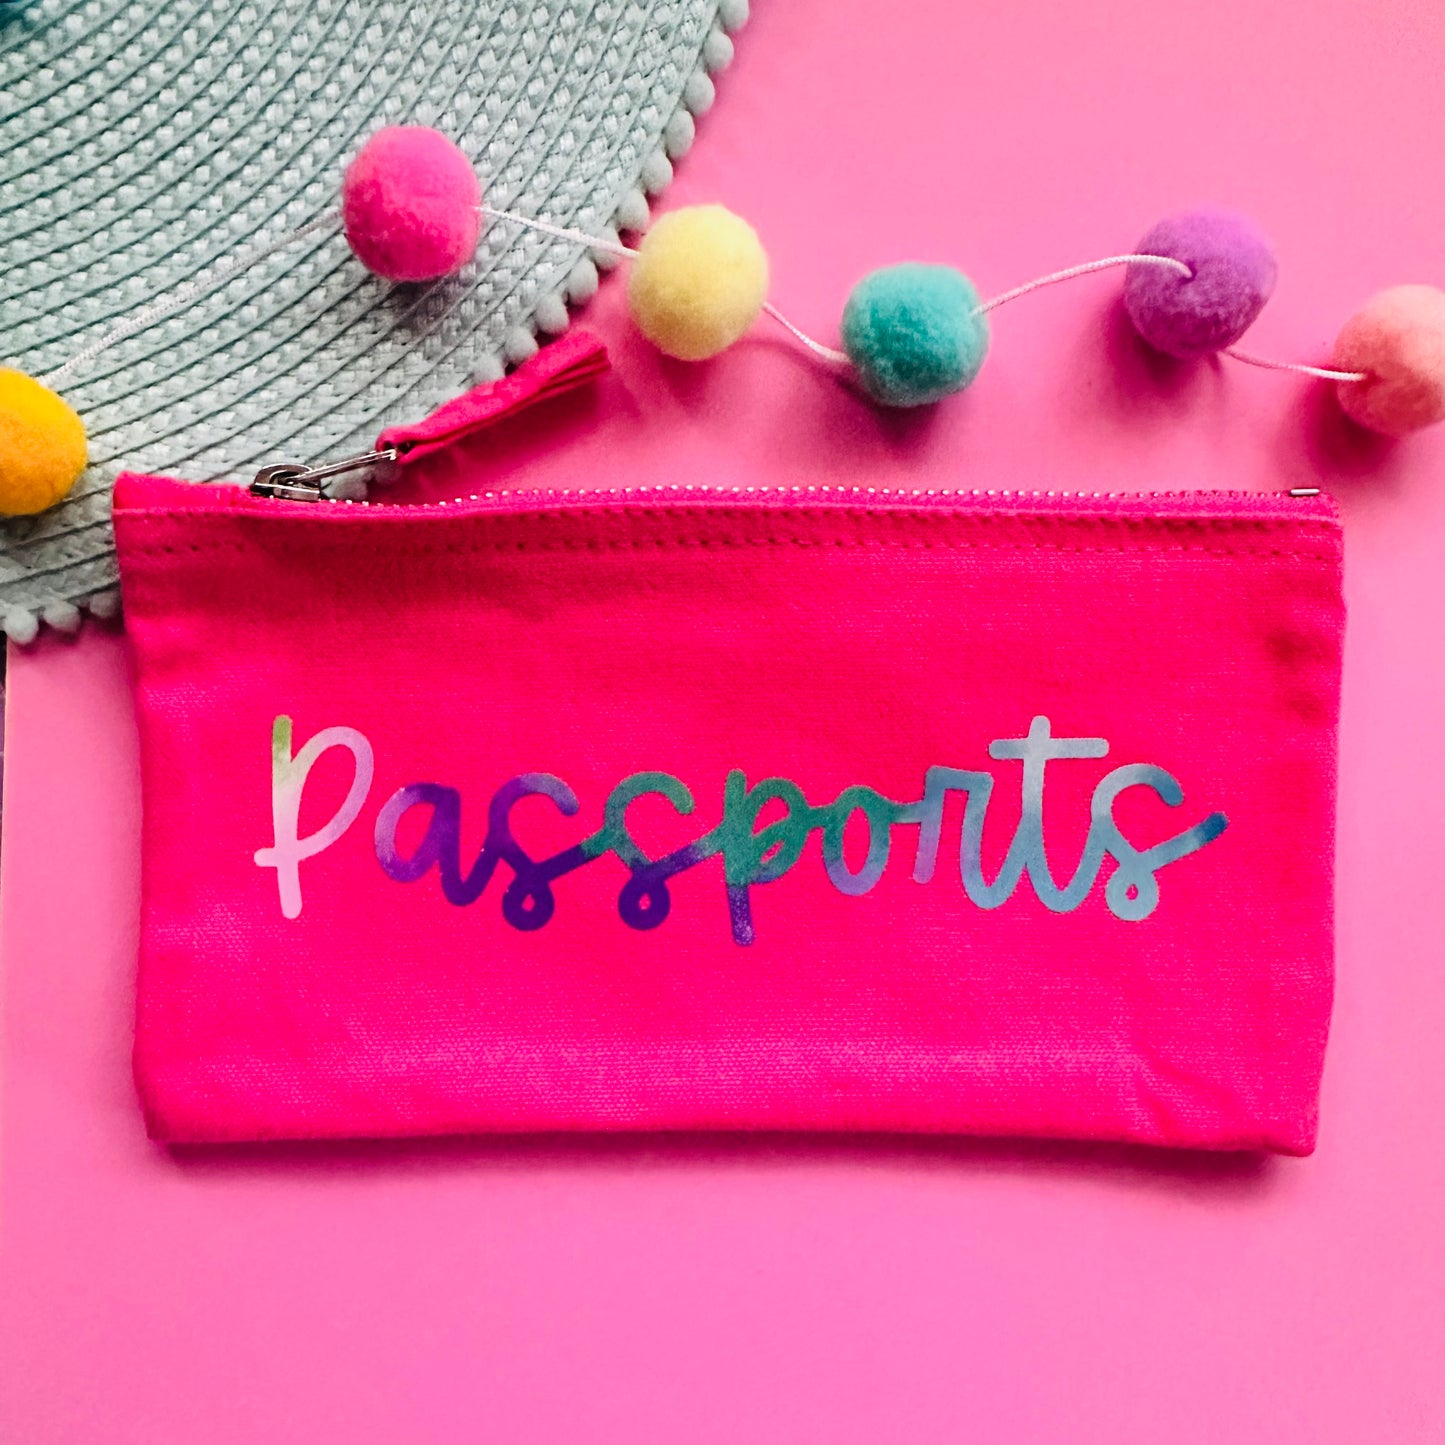 Limited Edition Passports Pouch